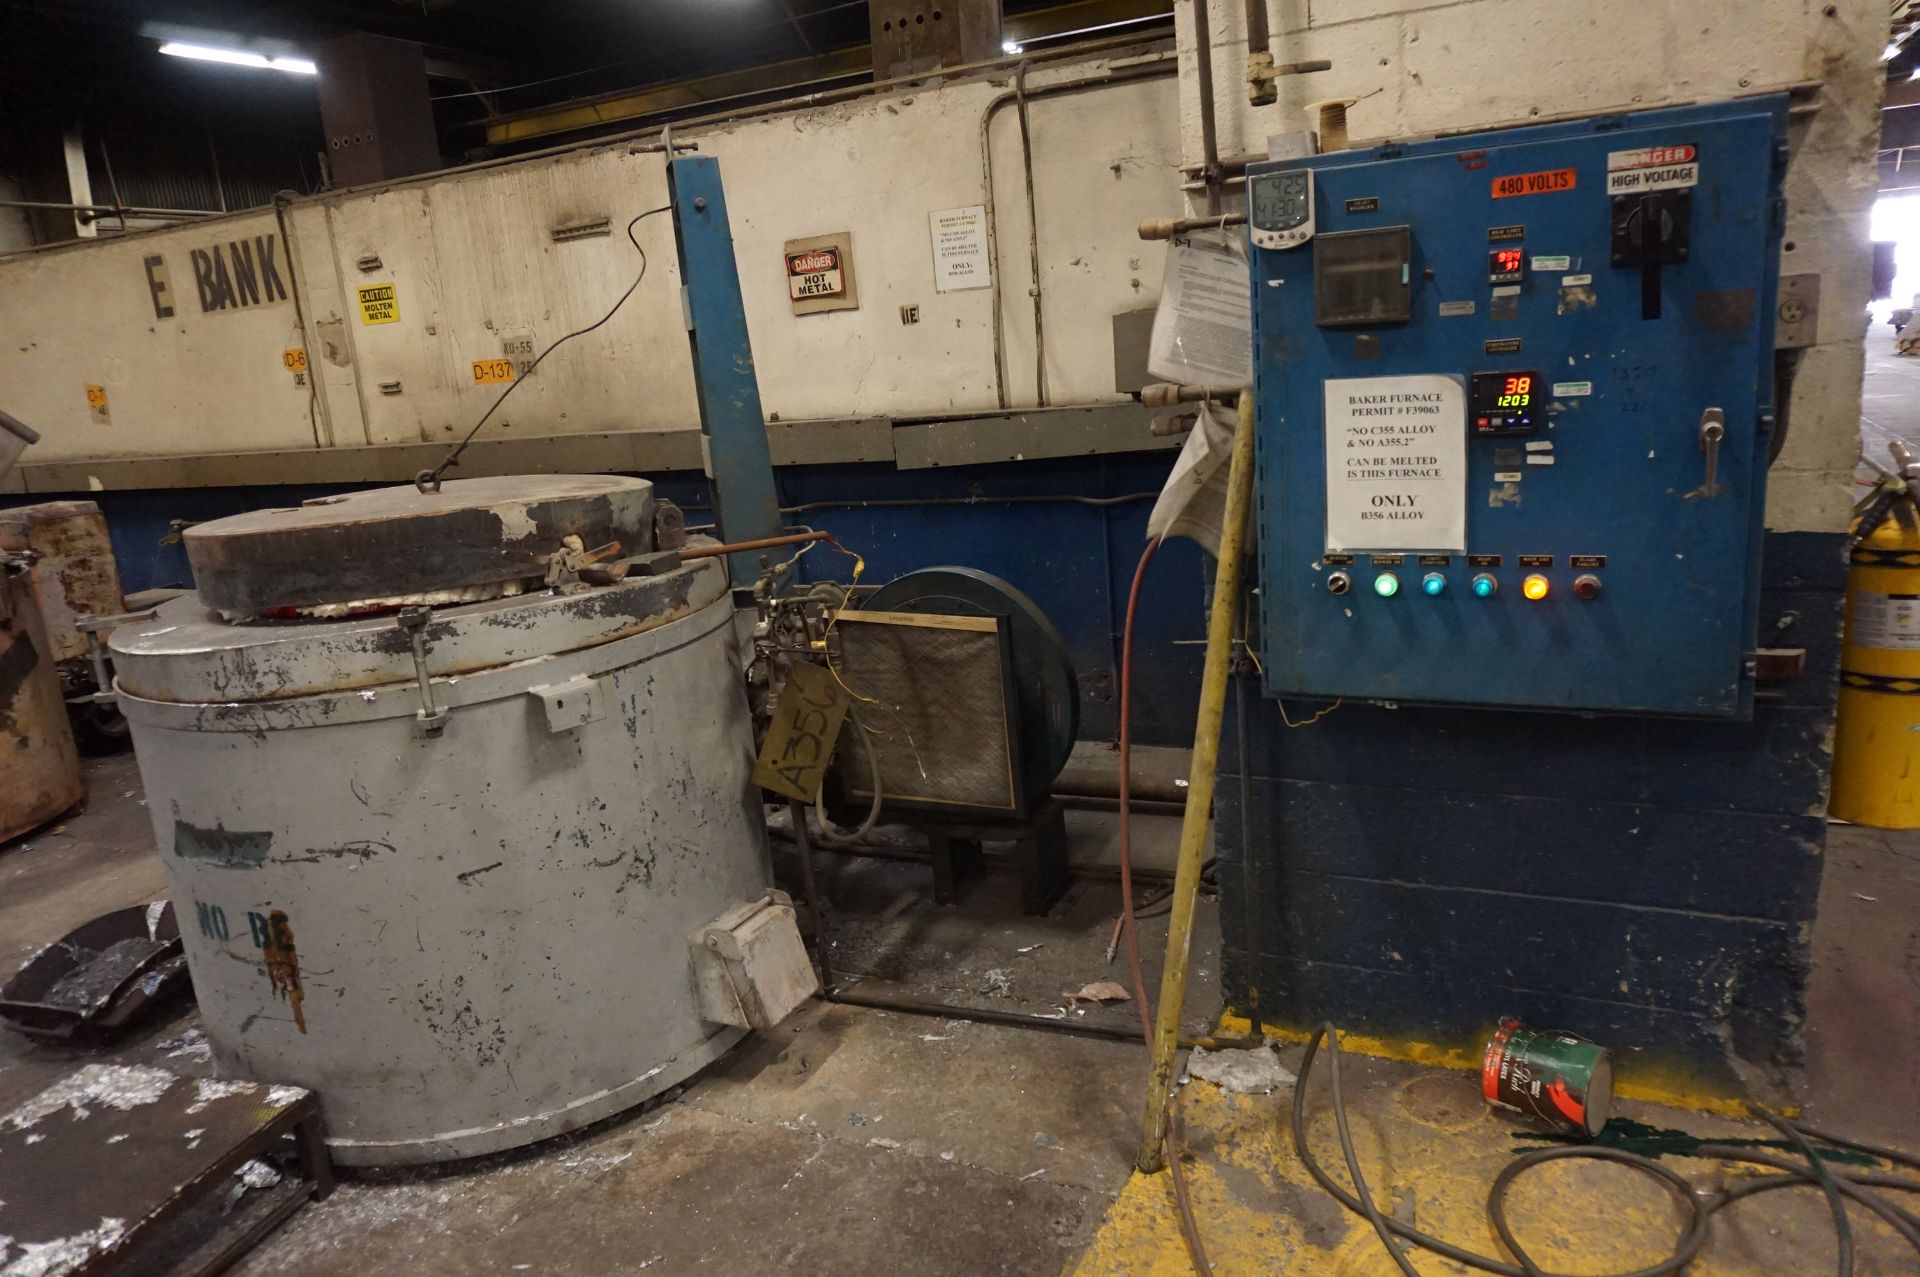 STATIONARY GAS FIRED FURNACE WITH BLOWERS, 900 LB, ALUMINUM MELTING *STILL IN USE AT TIME OF CATALOG - Image 3 of 5